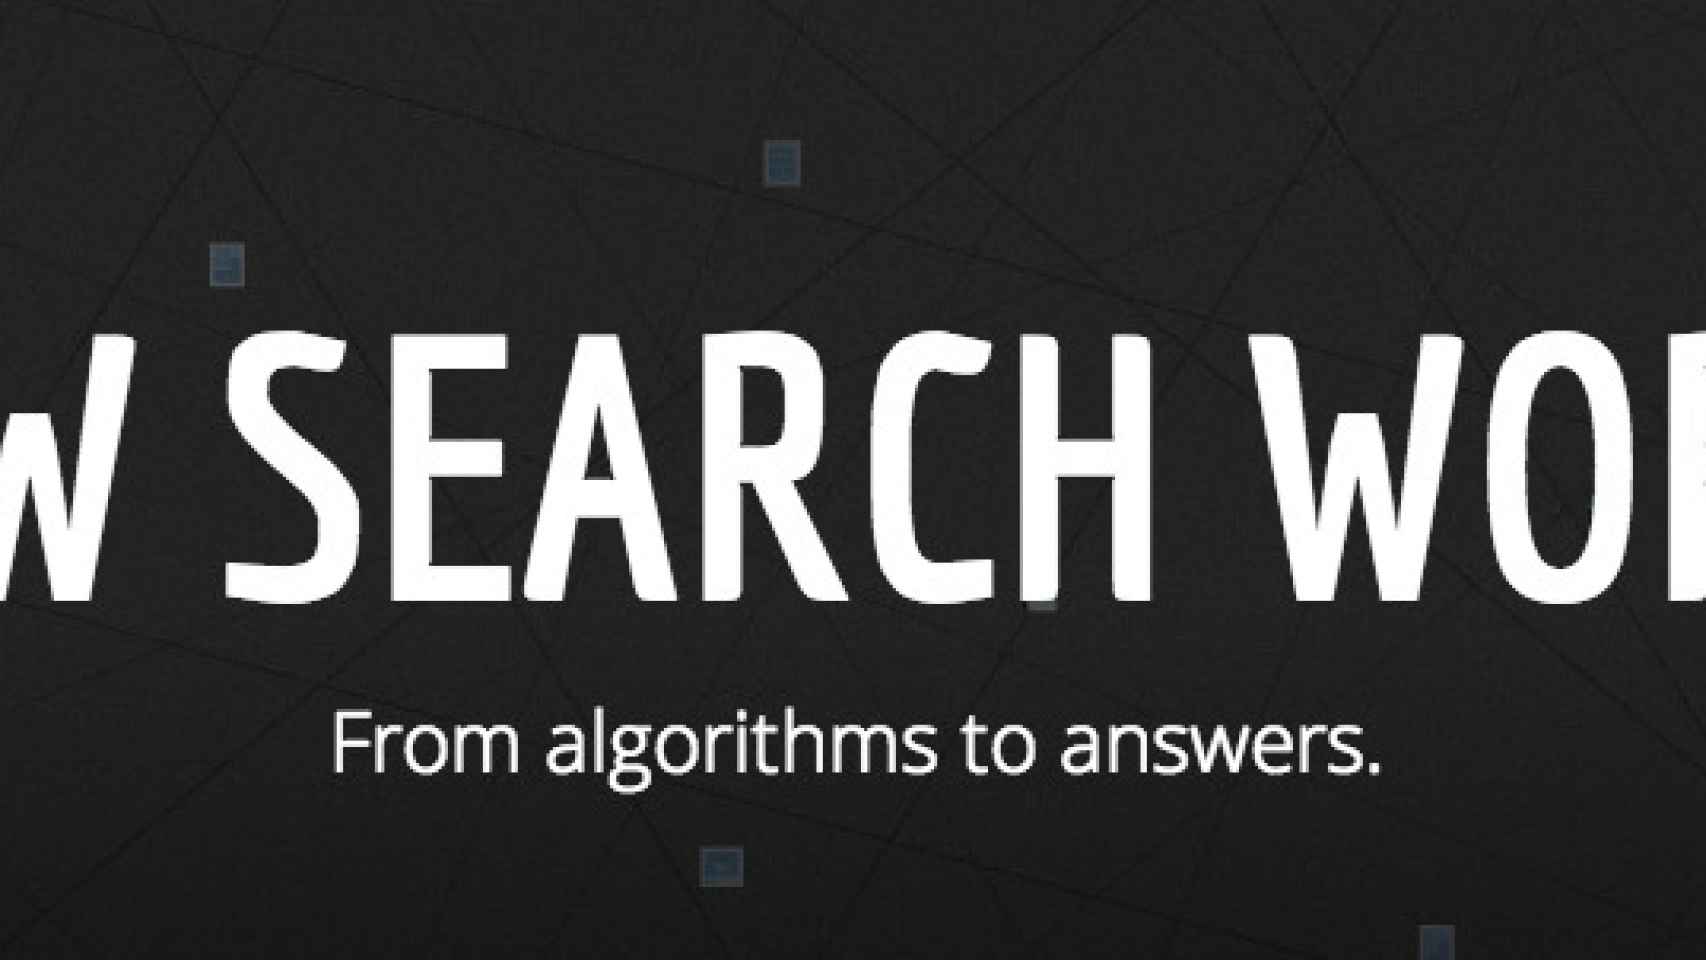 how search works